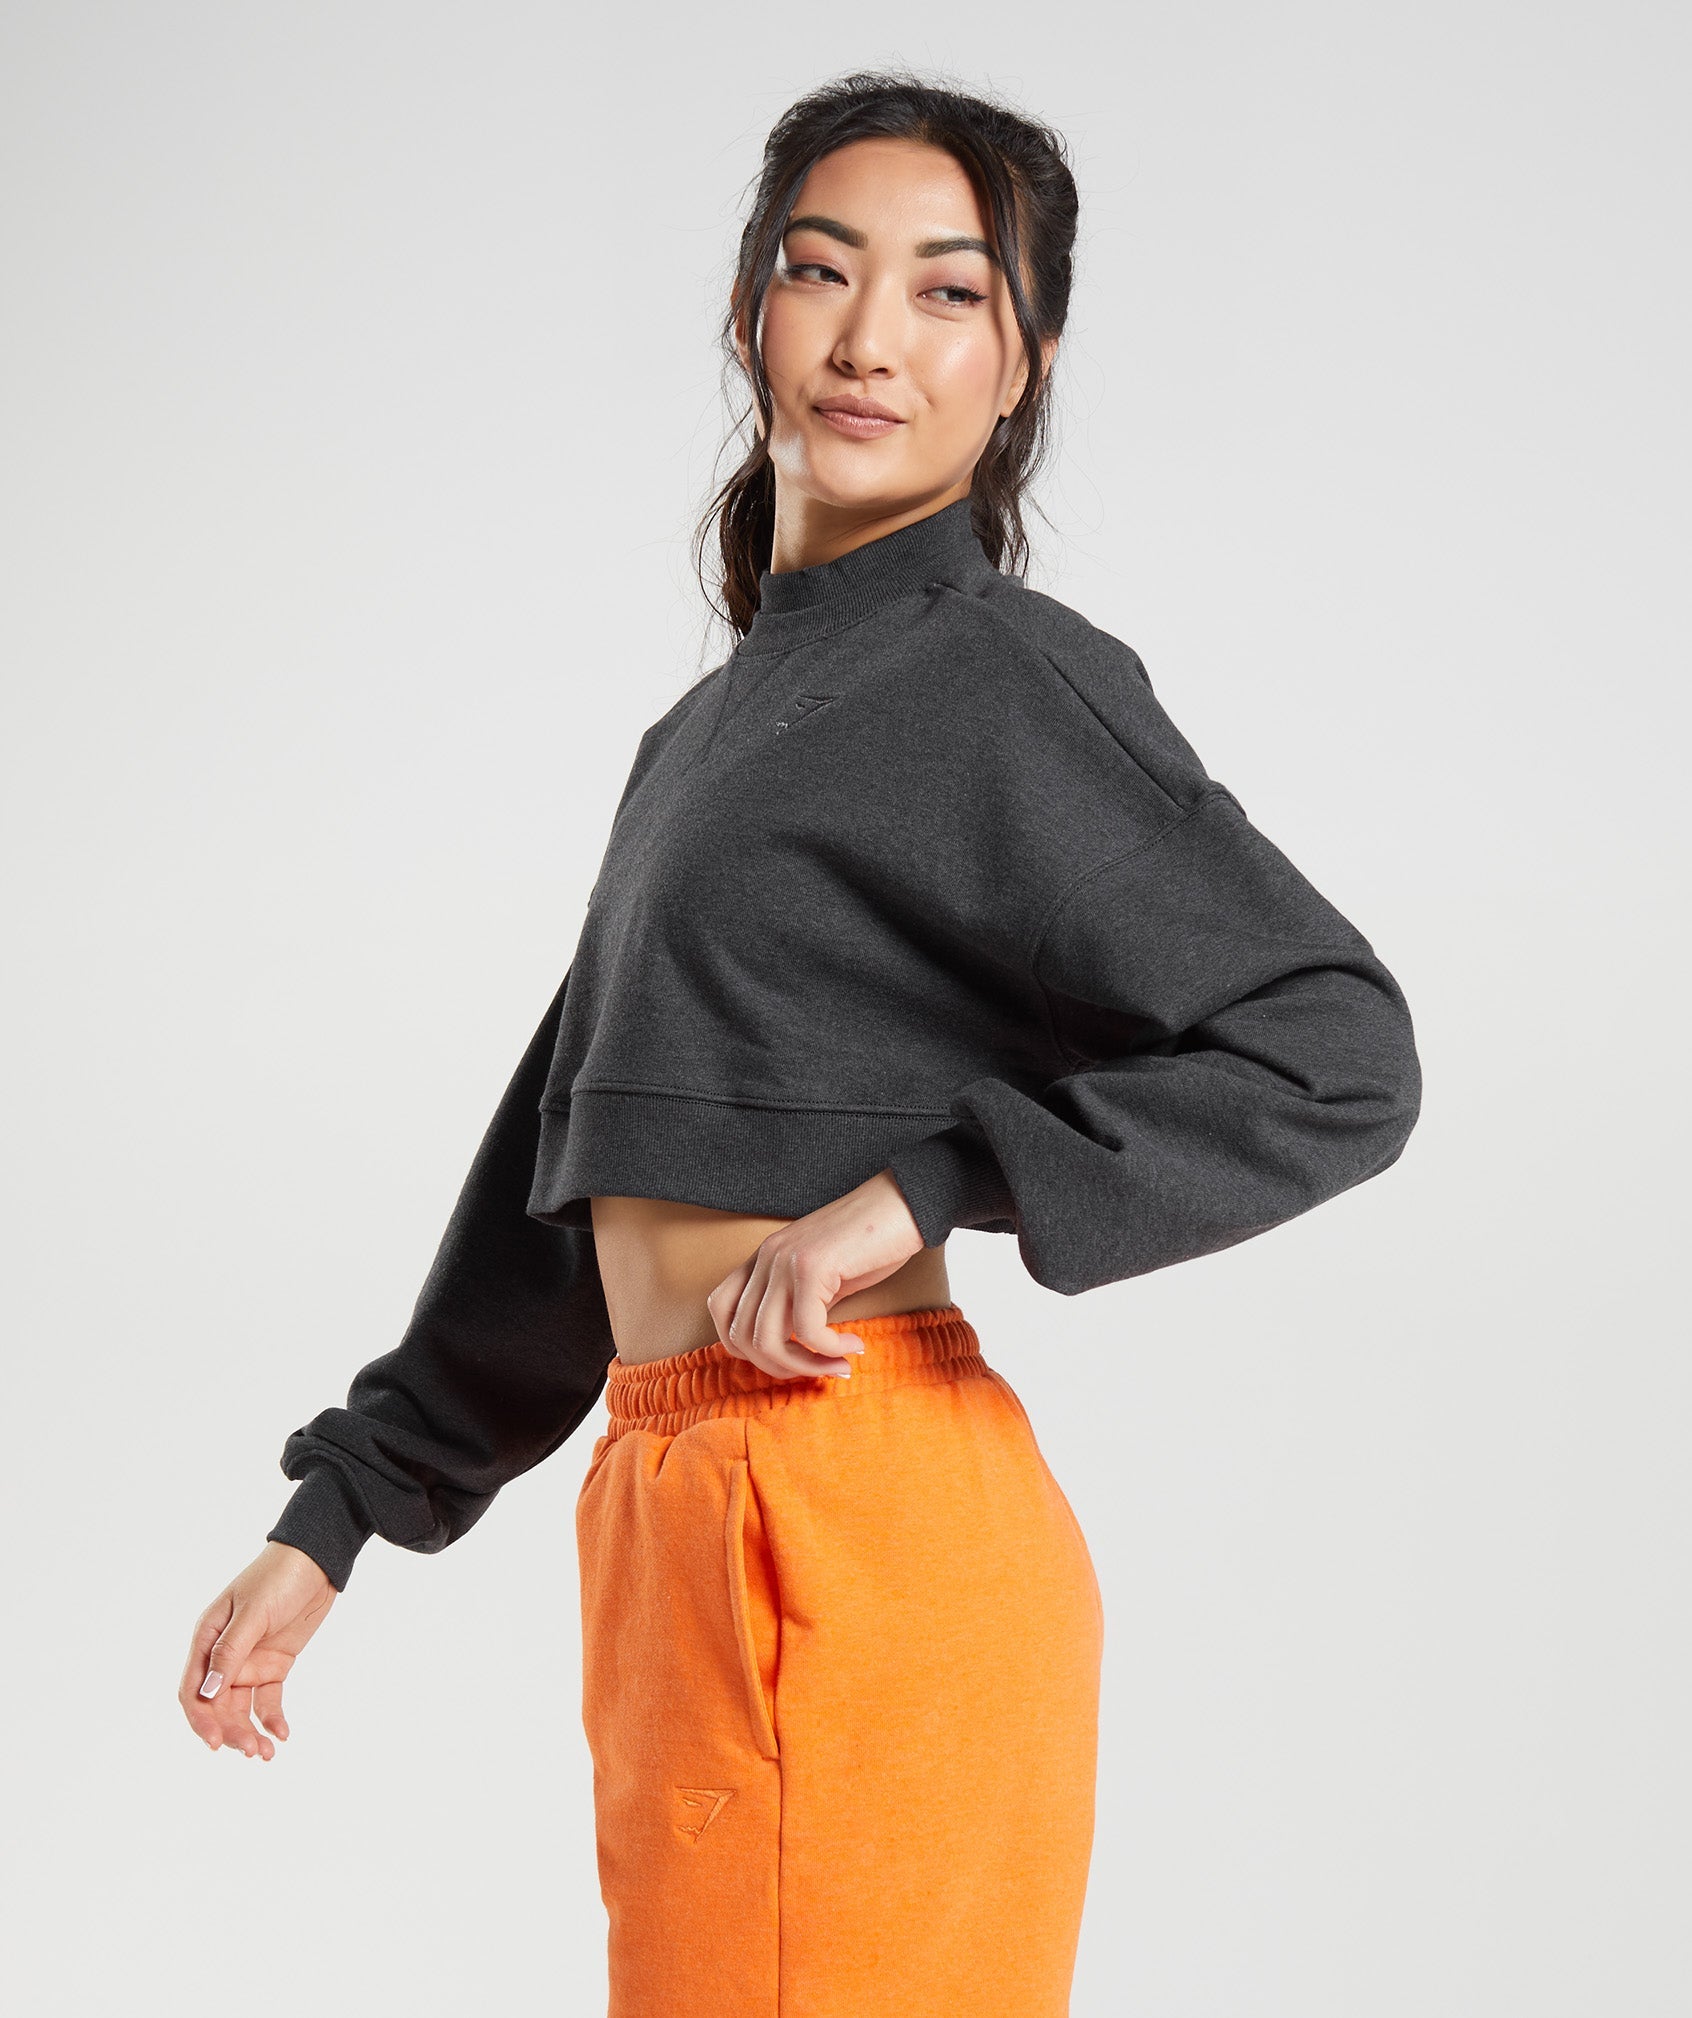 Rest Day Sweats Cropped Pullover in Black Core Marl